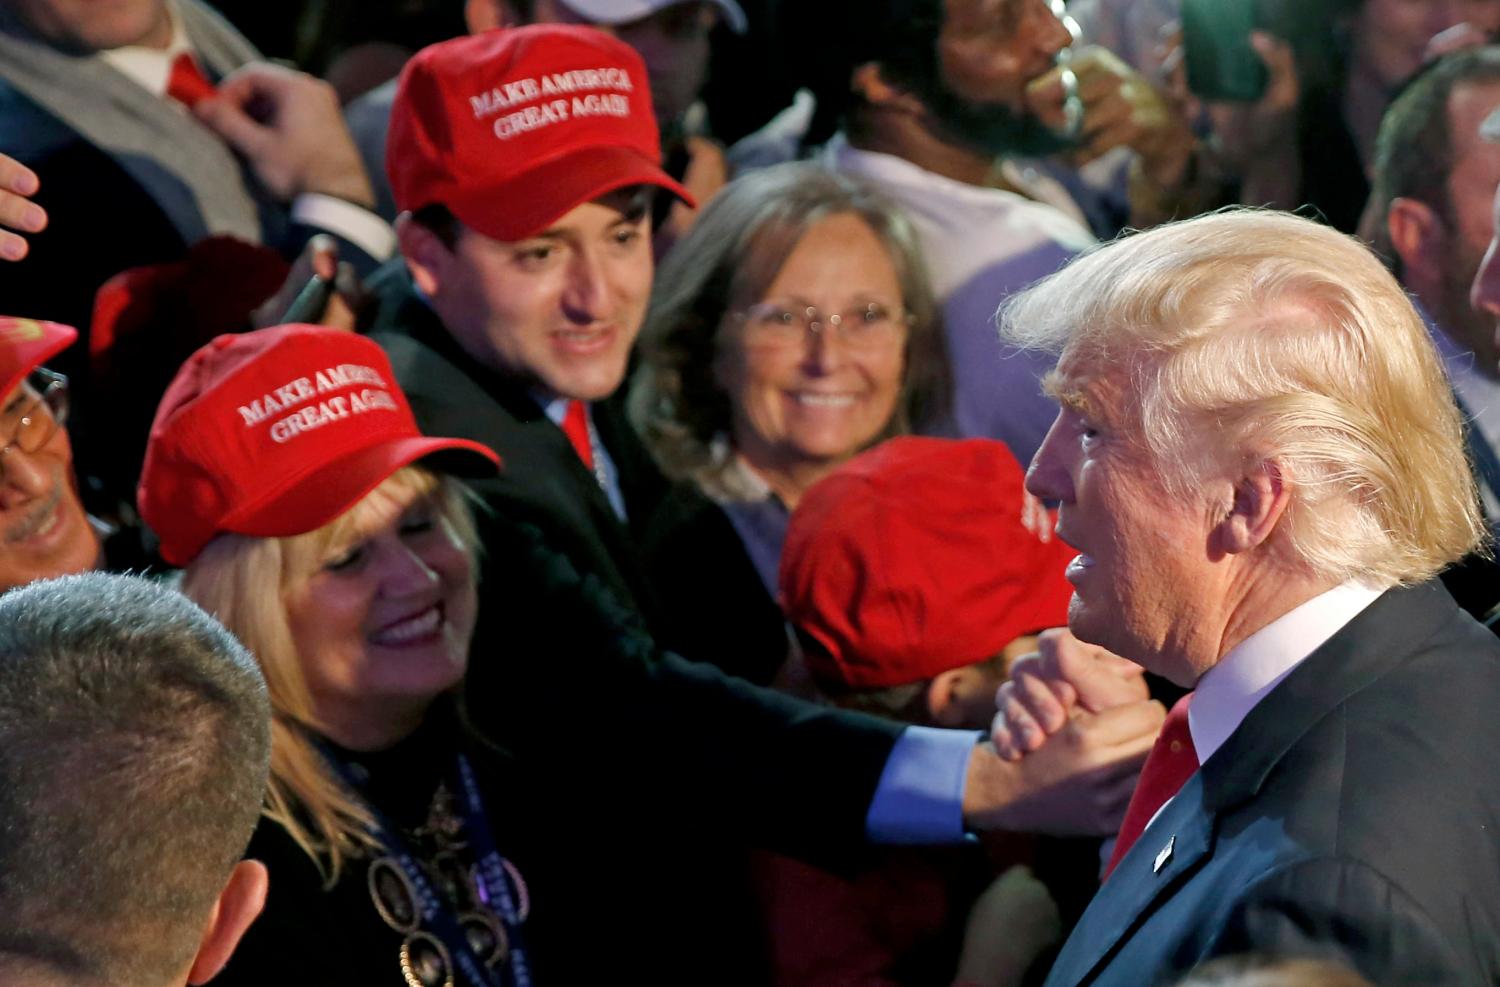 Republican U.S. presidential nominee Donald Trump greets supporters at his election night rally in Manhattan, New York, U.S., November 9, 2016. REUTERS/Carlo Allegri - RTX2SQ3H